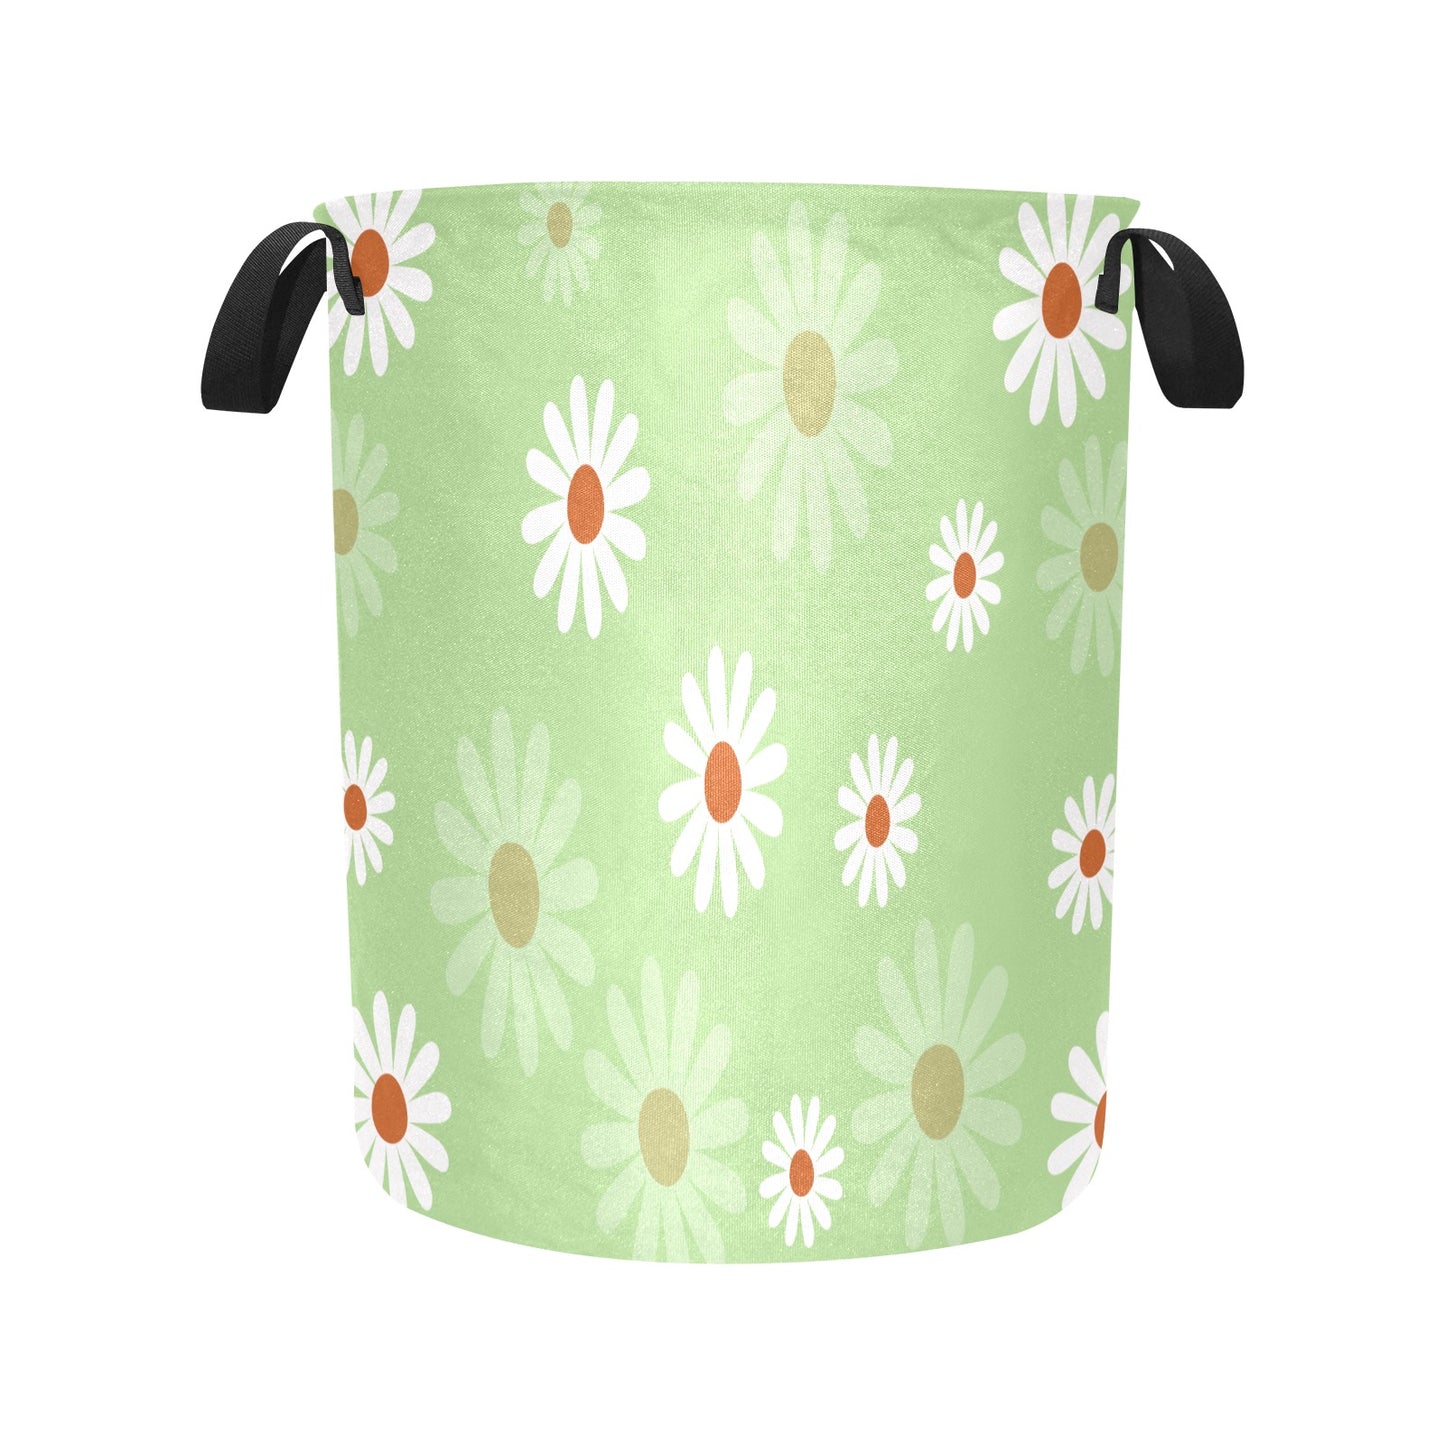 Floral Daisy Laundry Bag - Laundry Bag (Large) - Zanlana Design and Home Decor